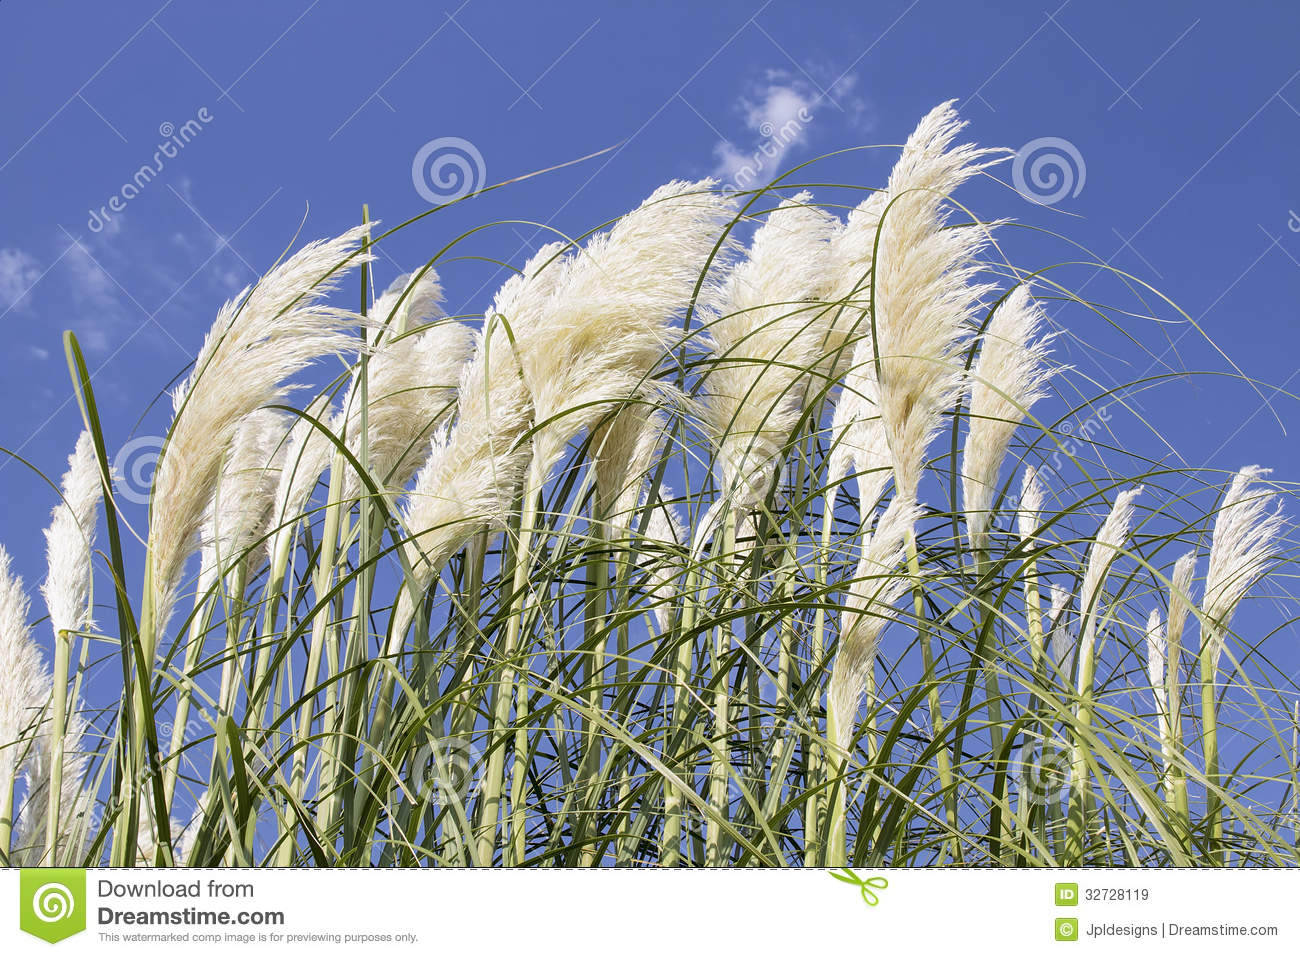 Pampas Grass clipart #19, Download drawings